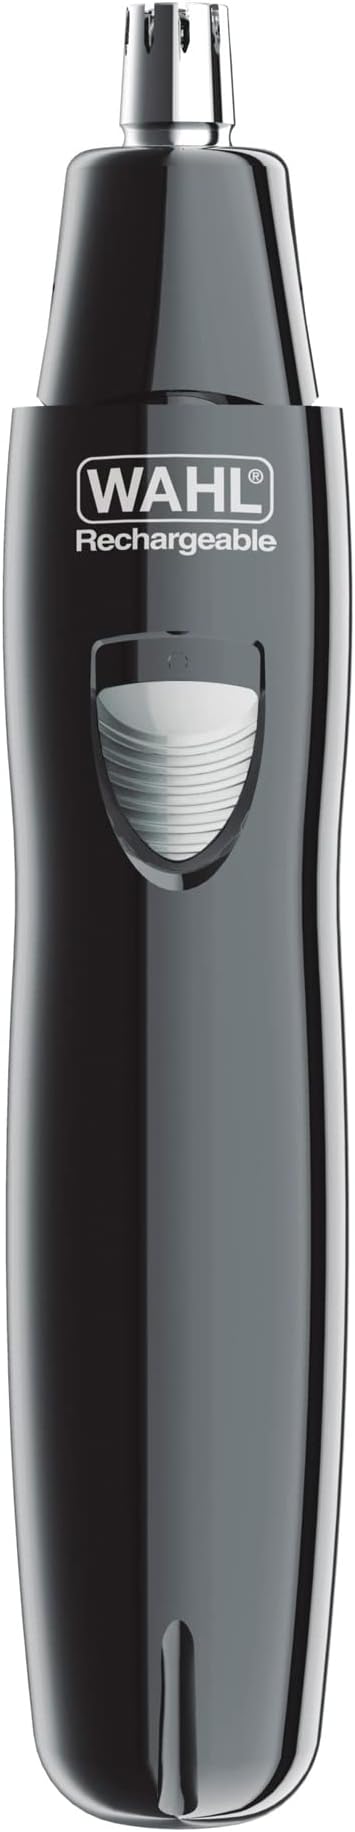 WAHL Canada Deluxe Groomer Rechargeable 6-in-1 Detailer, Personal Trimmer, Ear, Nose and Brow Trimmer, Certified for Canada  Black-5556